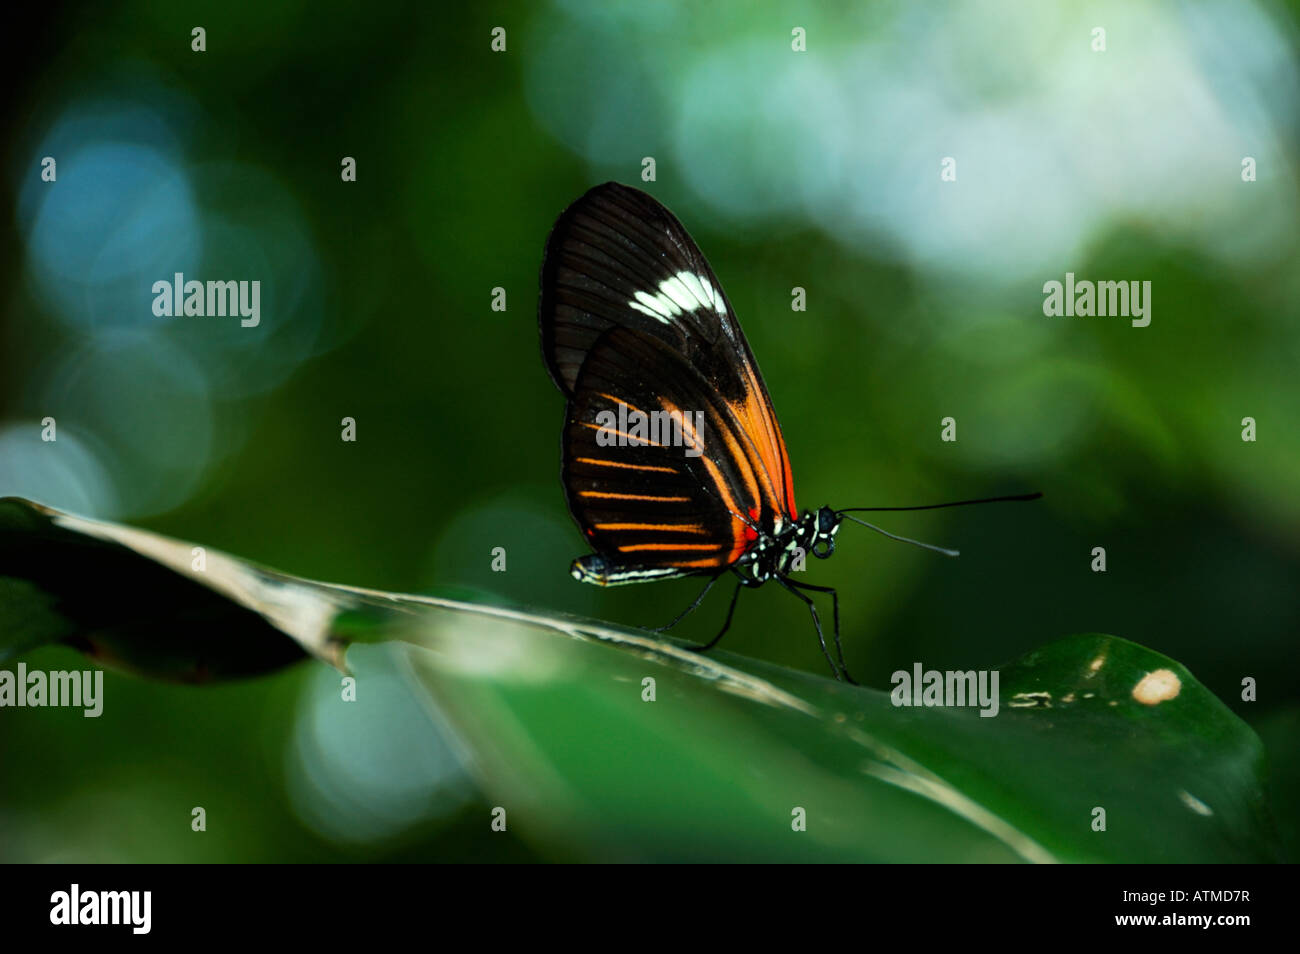 A Madiera butterfly resting on a green leaf. Stock Photo